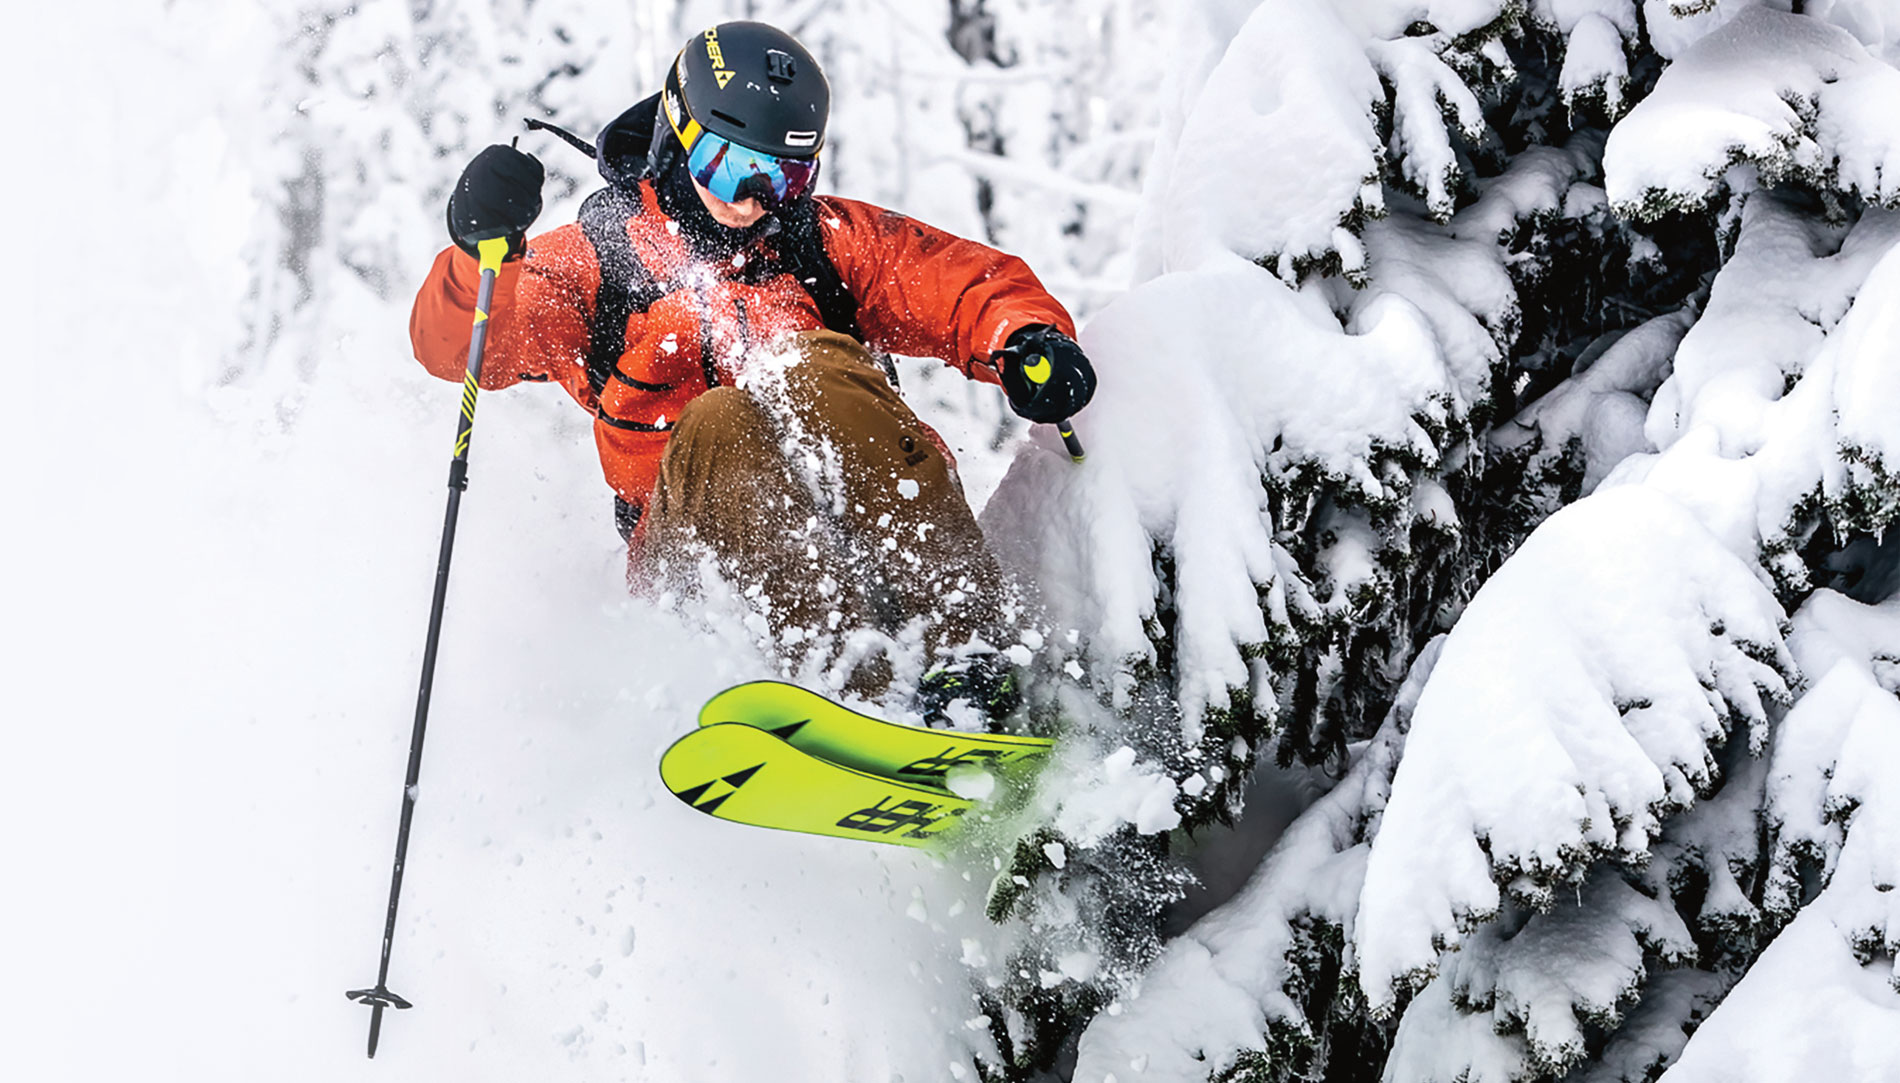 A skier lauching off a tree at Whitewater Ski Resort